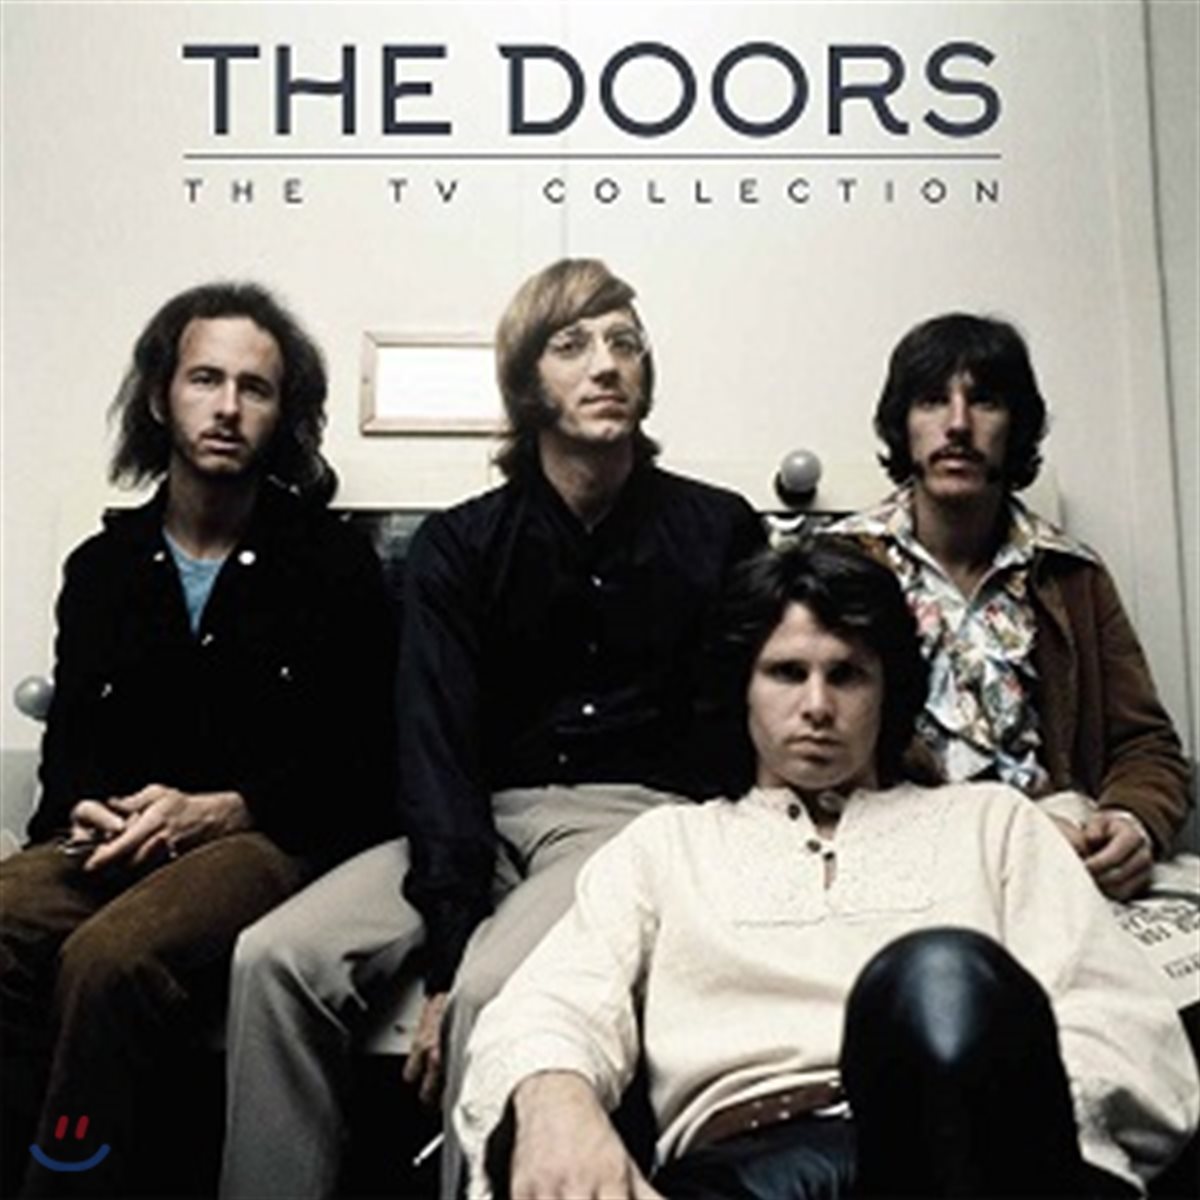 The Doors (도어스) - The TV Collection [2 LP]